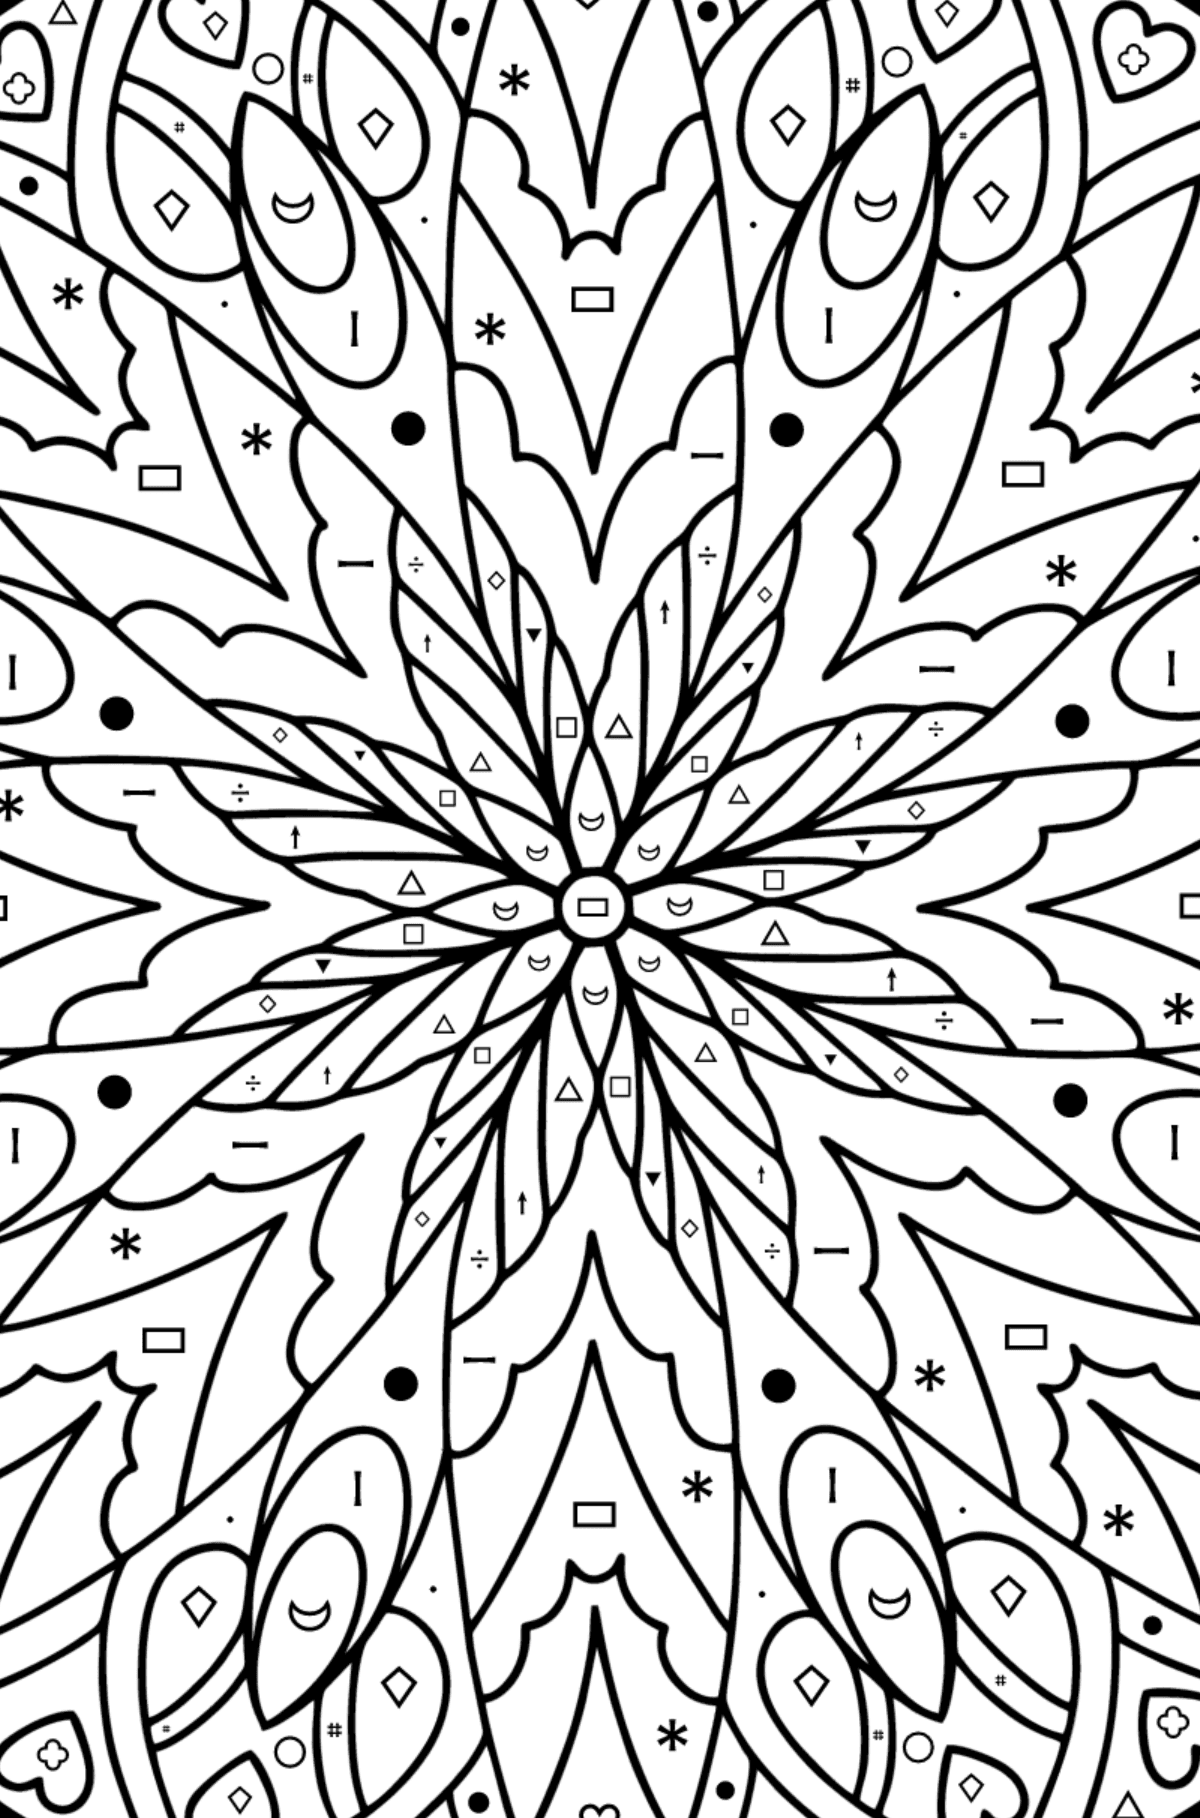 Complex Coloring Page for Kids - Mandala - Coloring by Symbols and Geometric Shapes for Kids